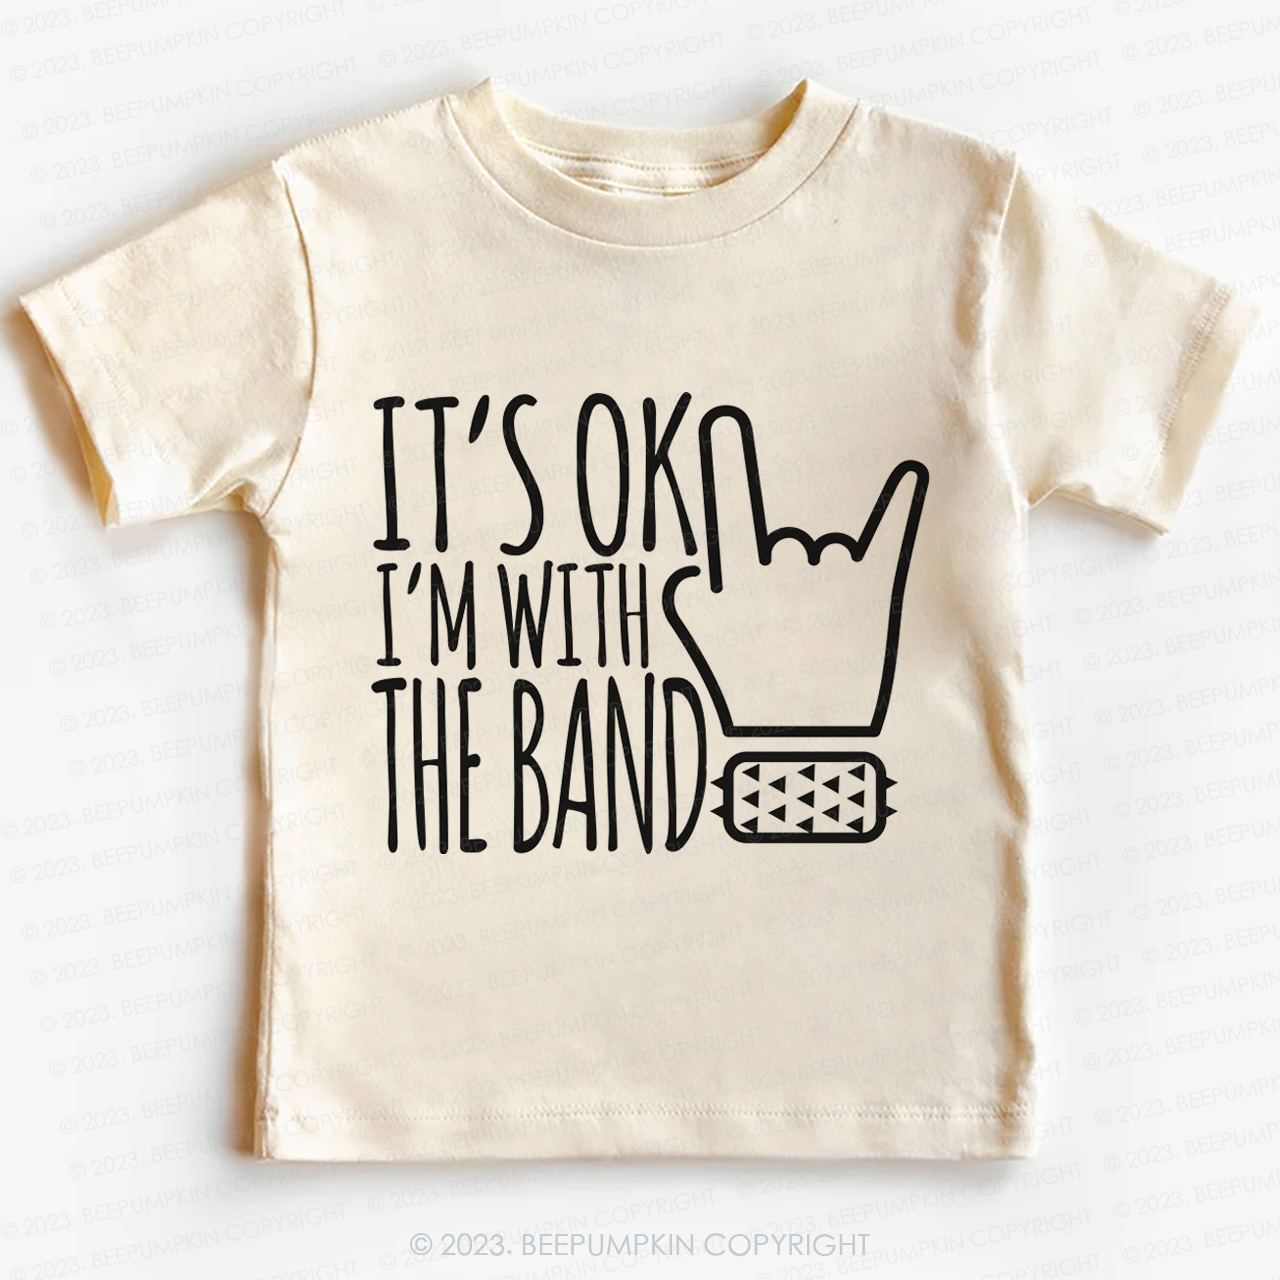 I'm With The Band Kids Shirt